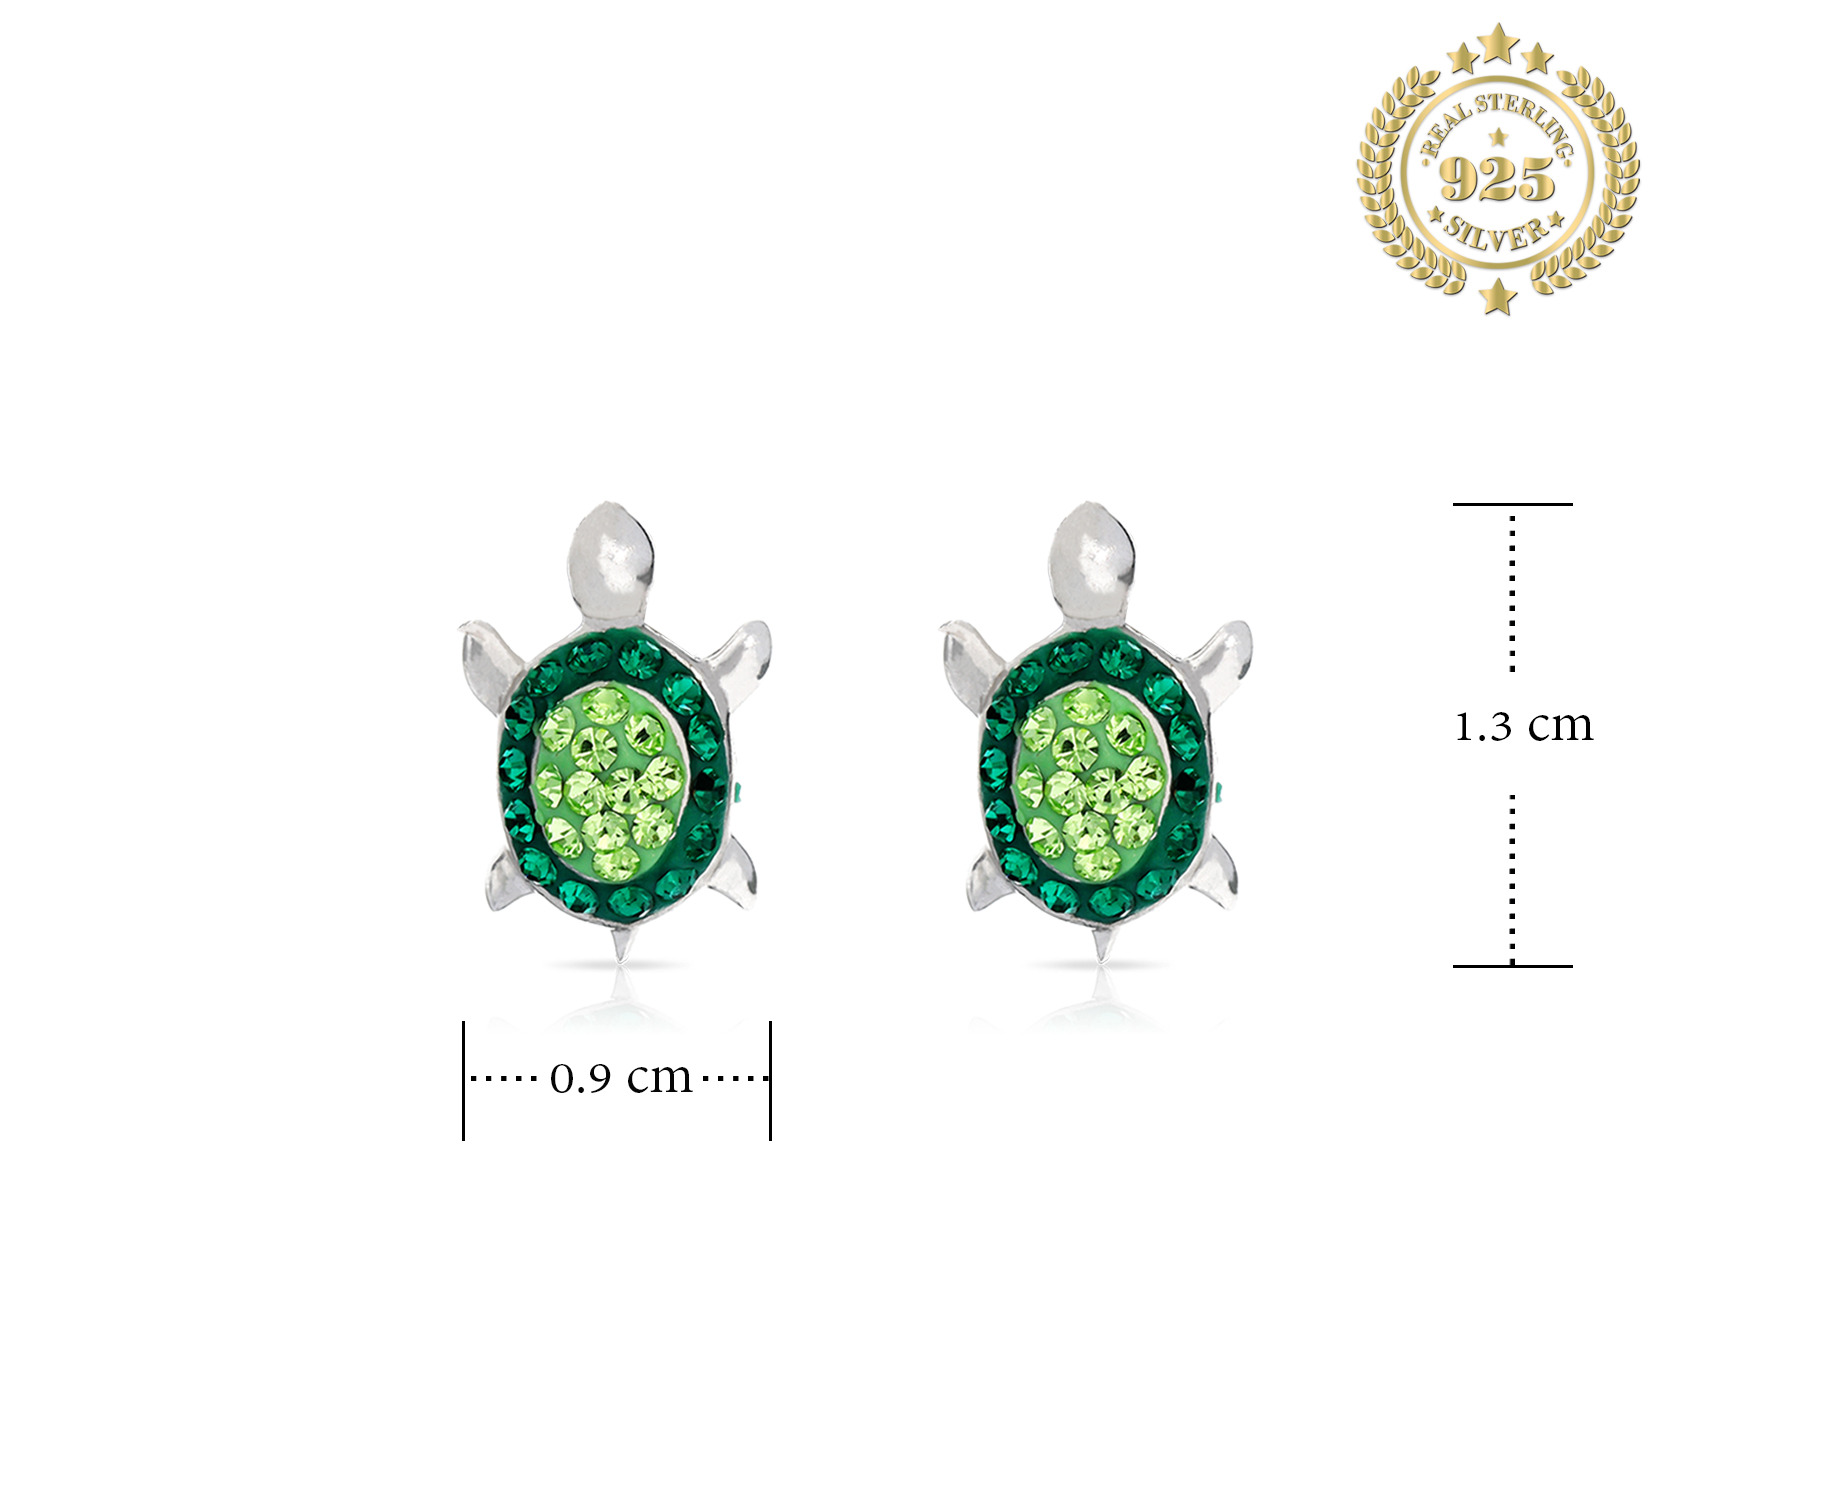 Turtley Awesome Cutie Clip On Earrings